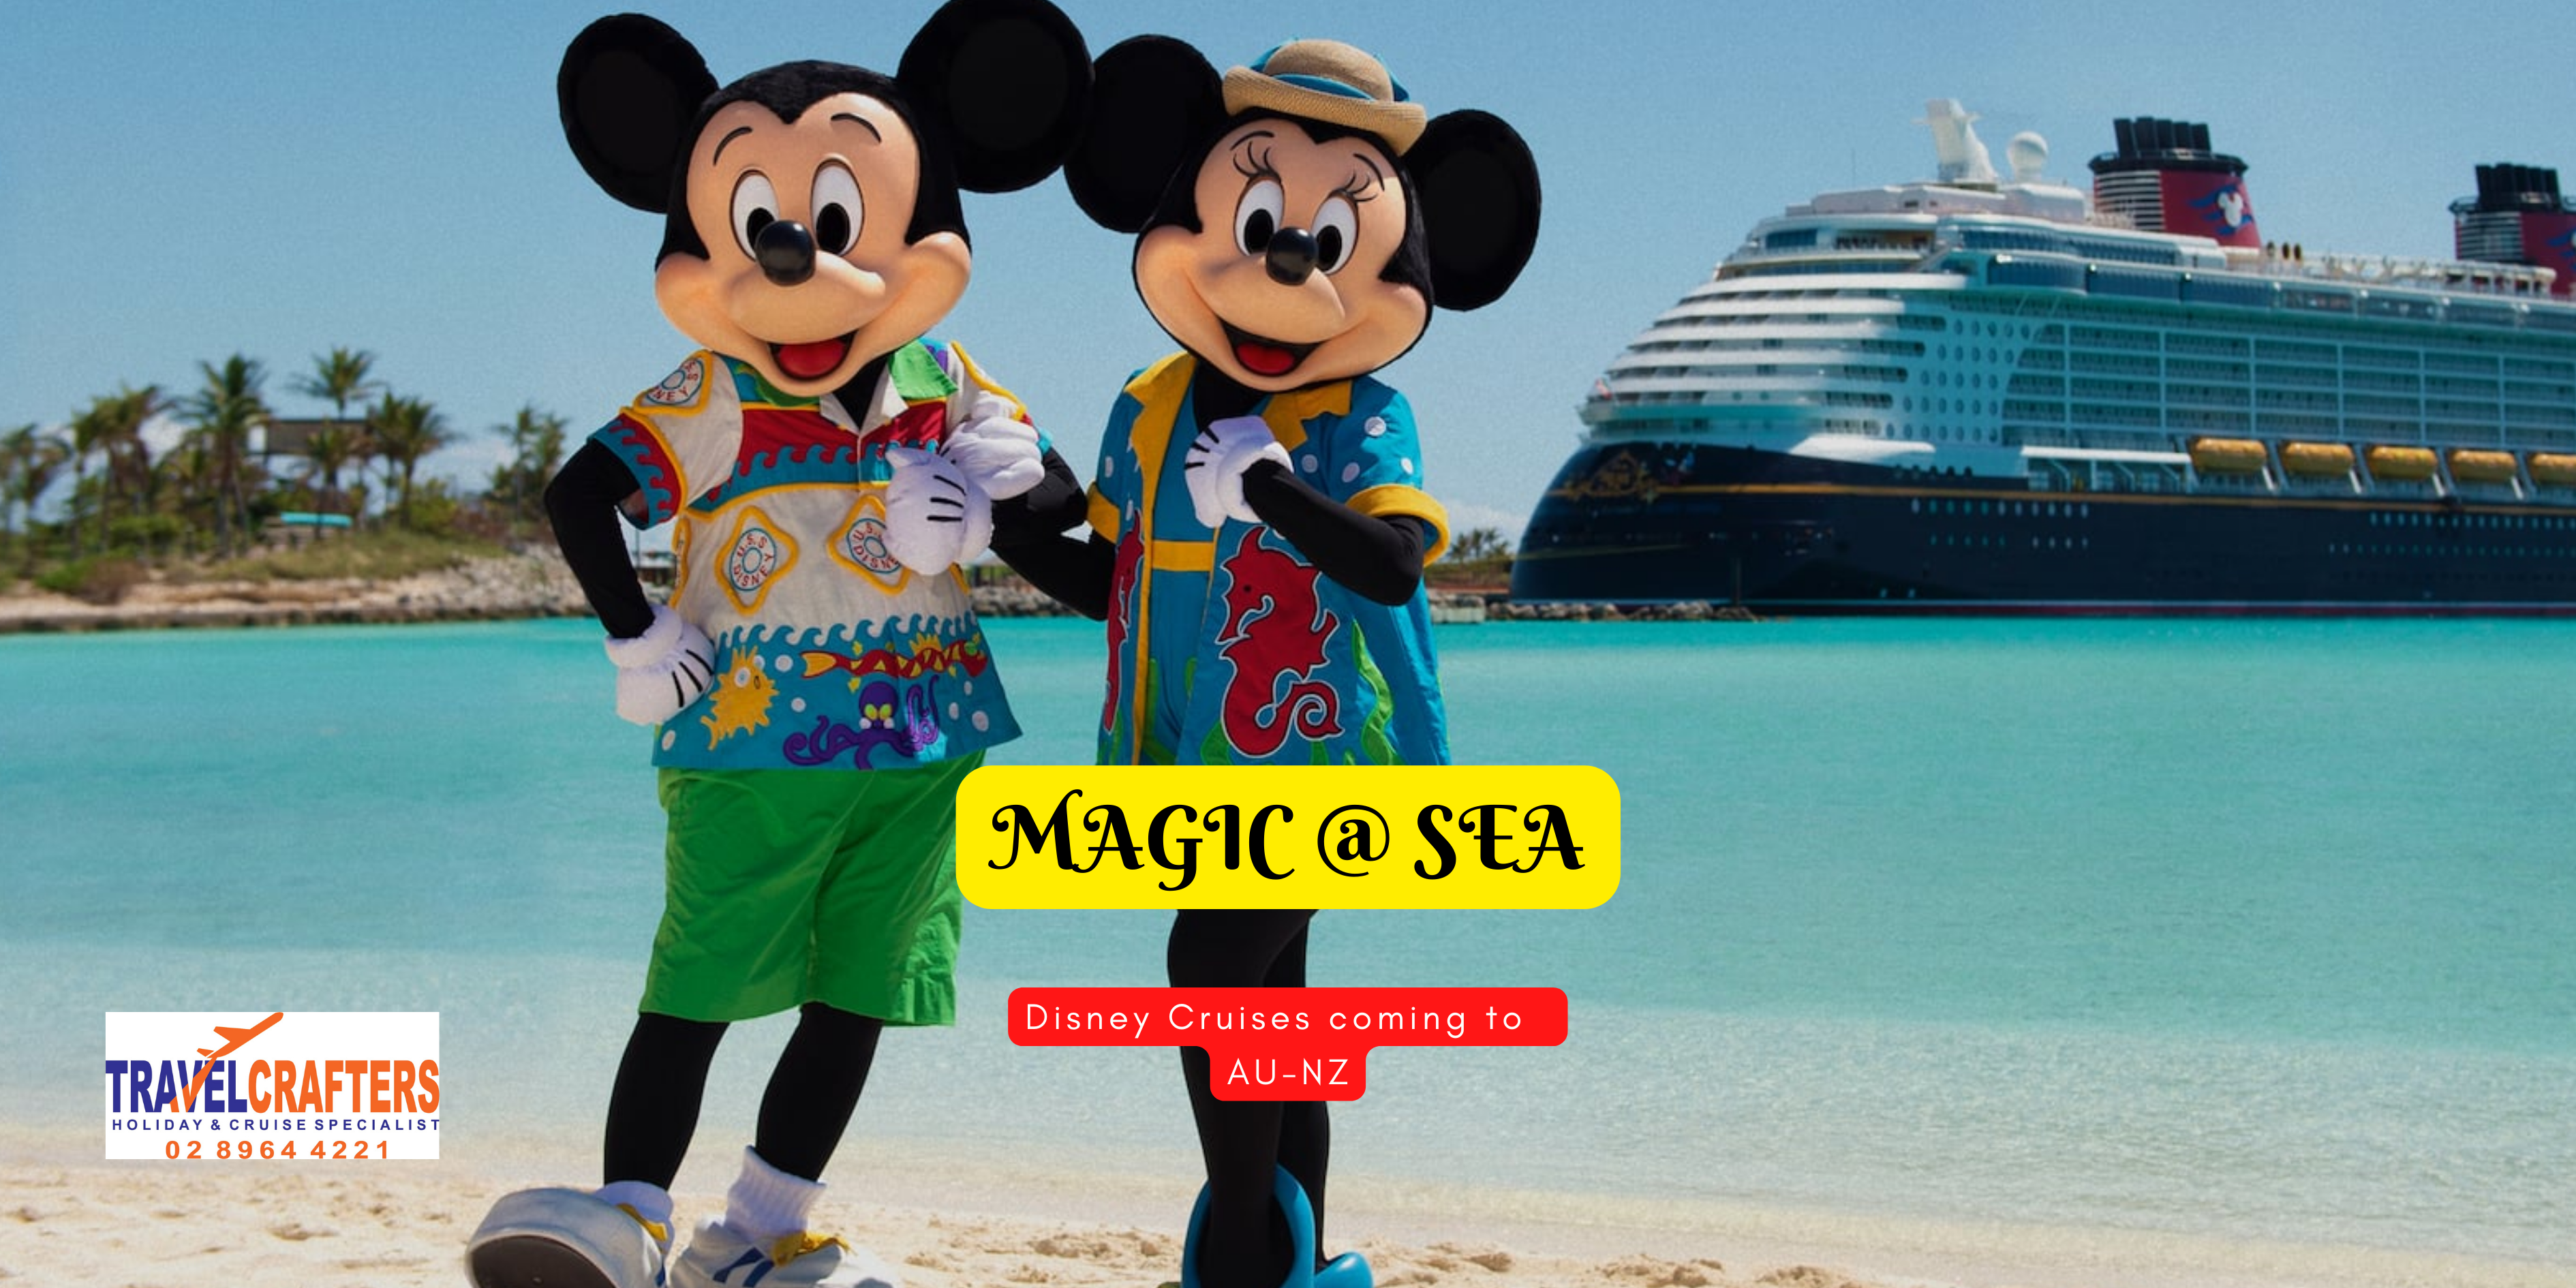 Disney Cruise Travel Crafters